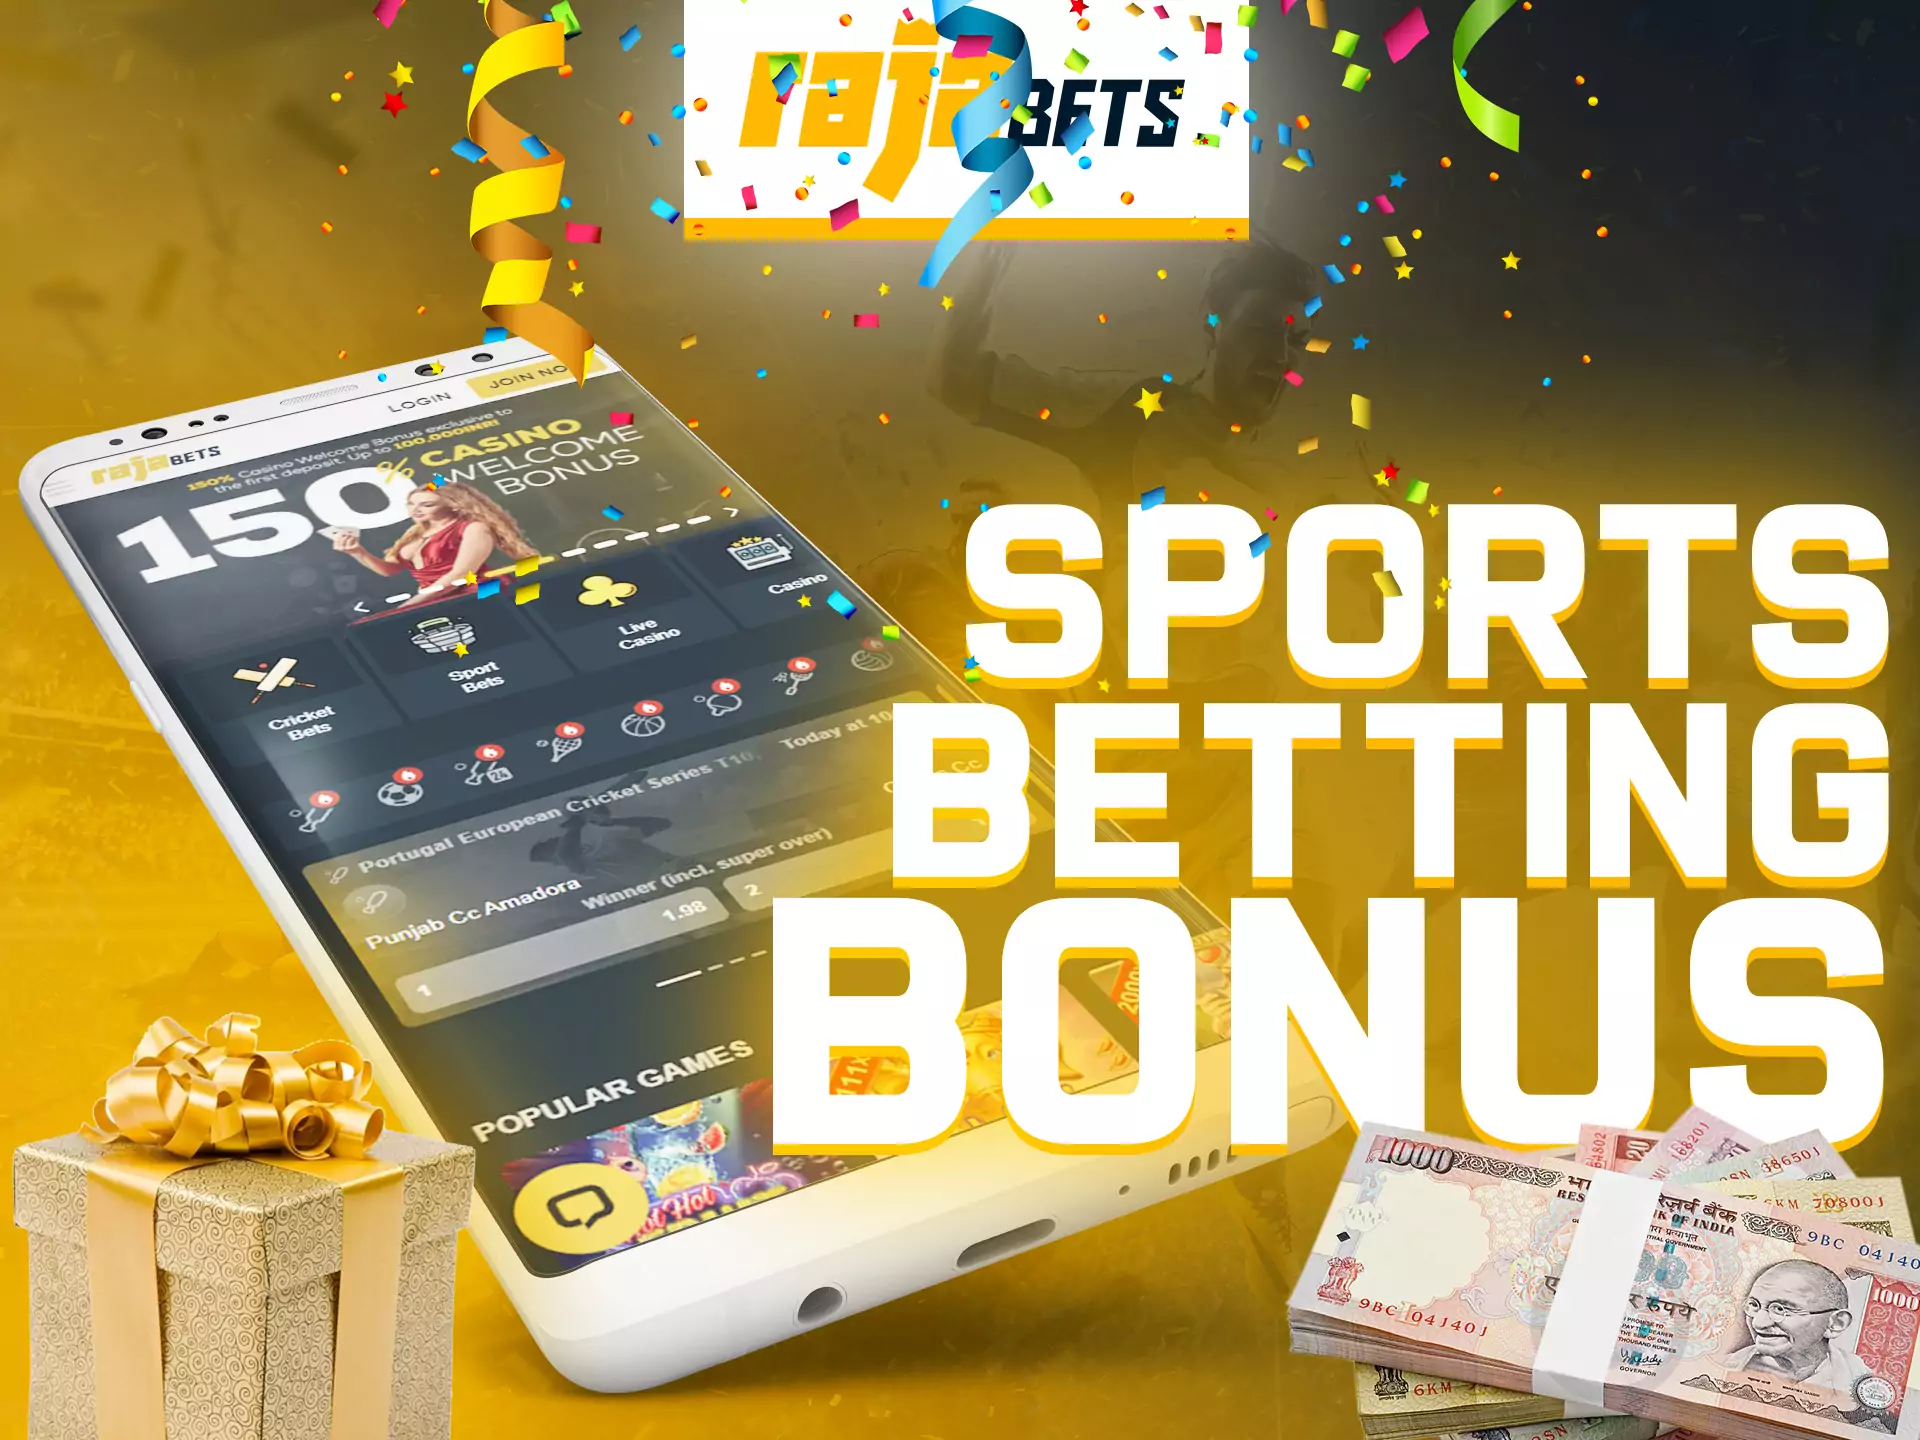 Get a special sports betting bonus on Rajabets app.